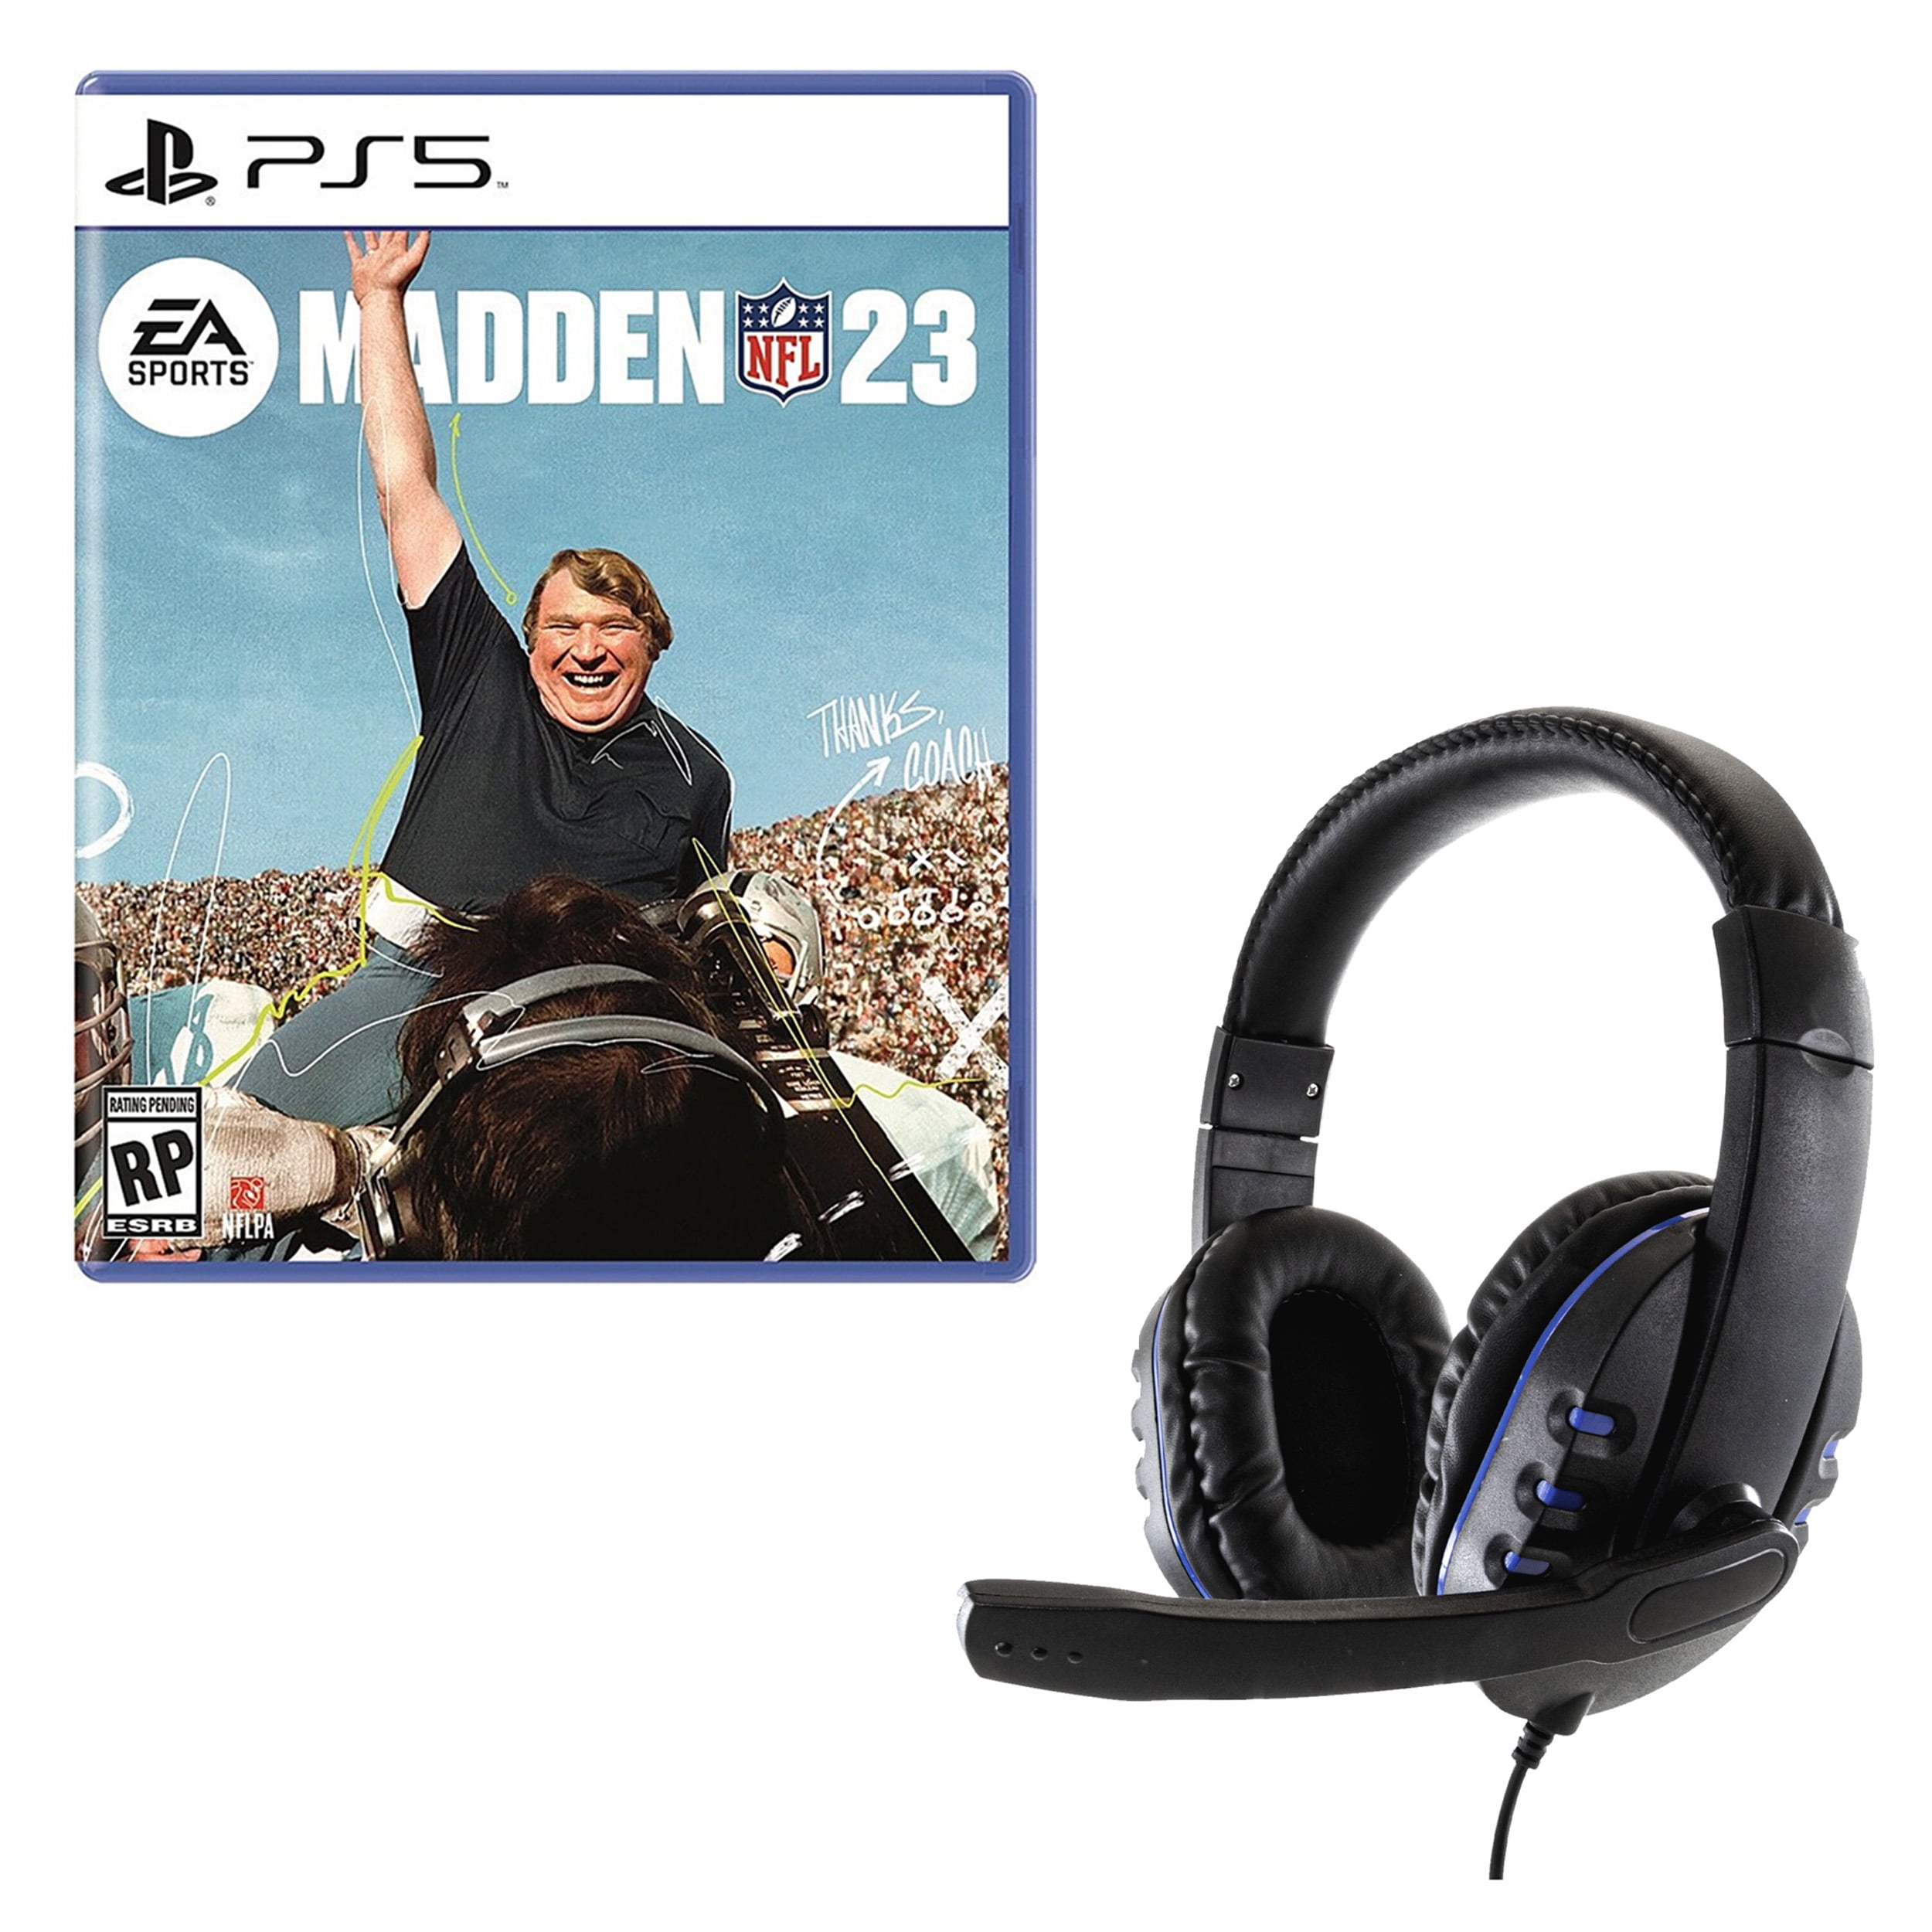 Sony Madden NFL 23 Game with Universal Headset - PS5